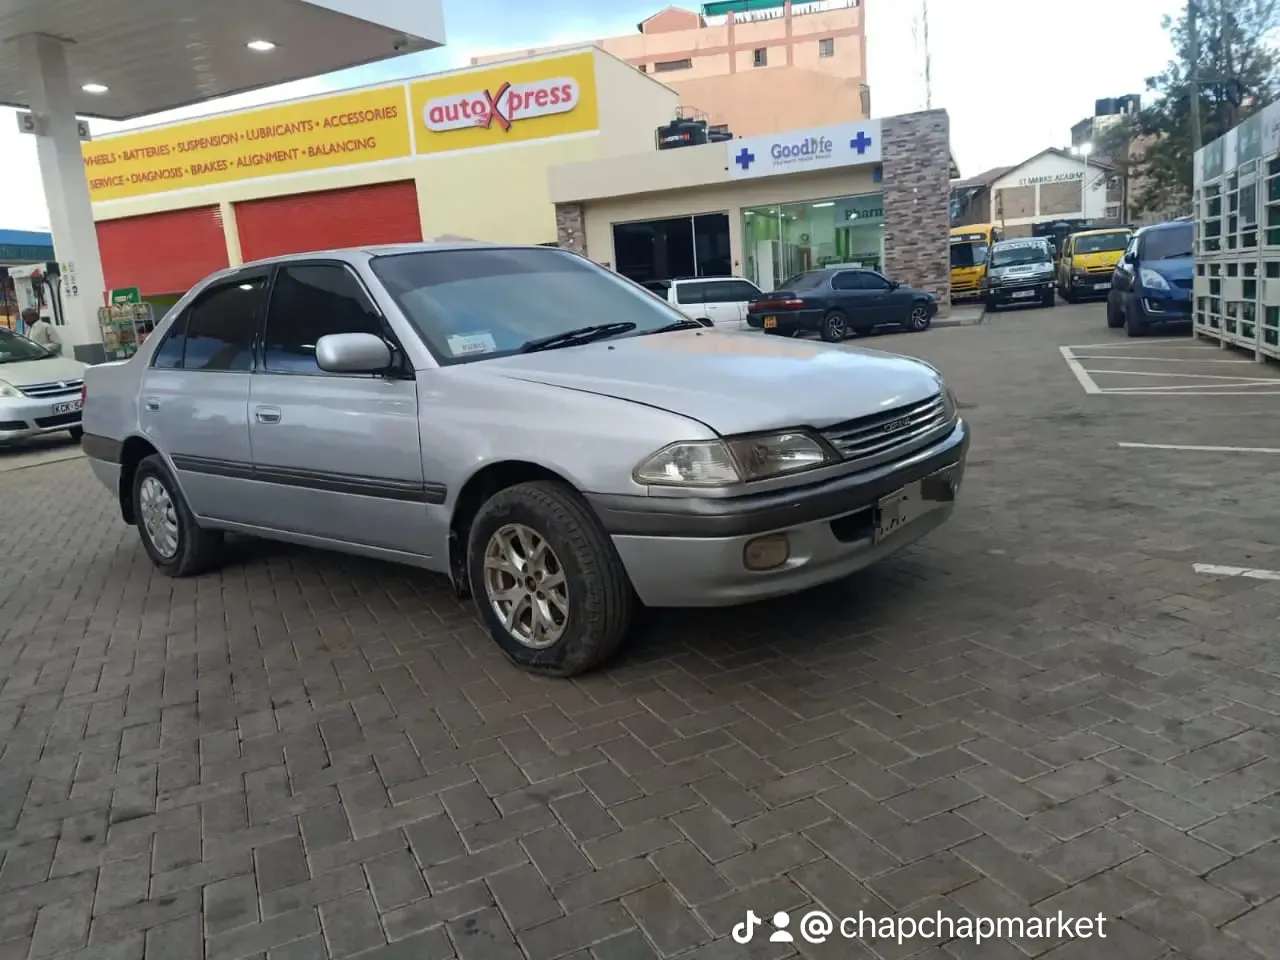 Toyota Carina CHEAPEST 290K Only You pay 30% Deposit Trade in Ok For Sale in Kenya exclusive